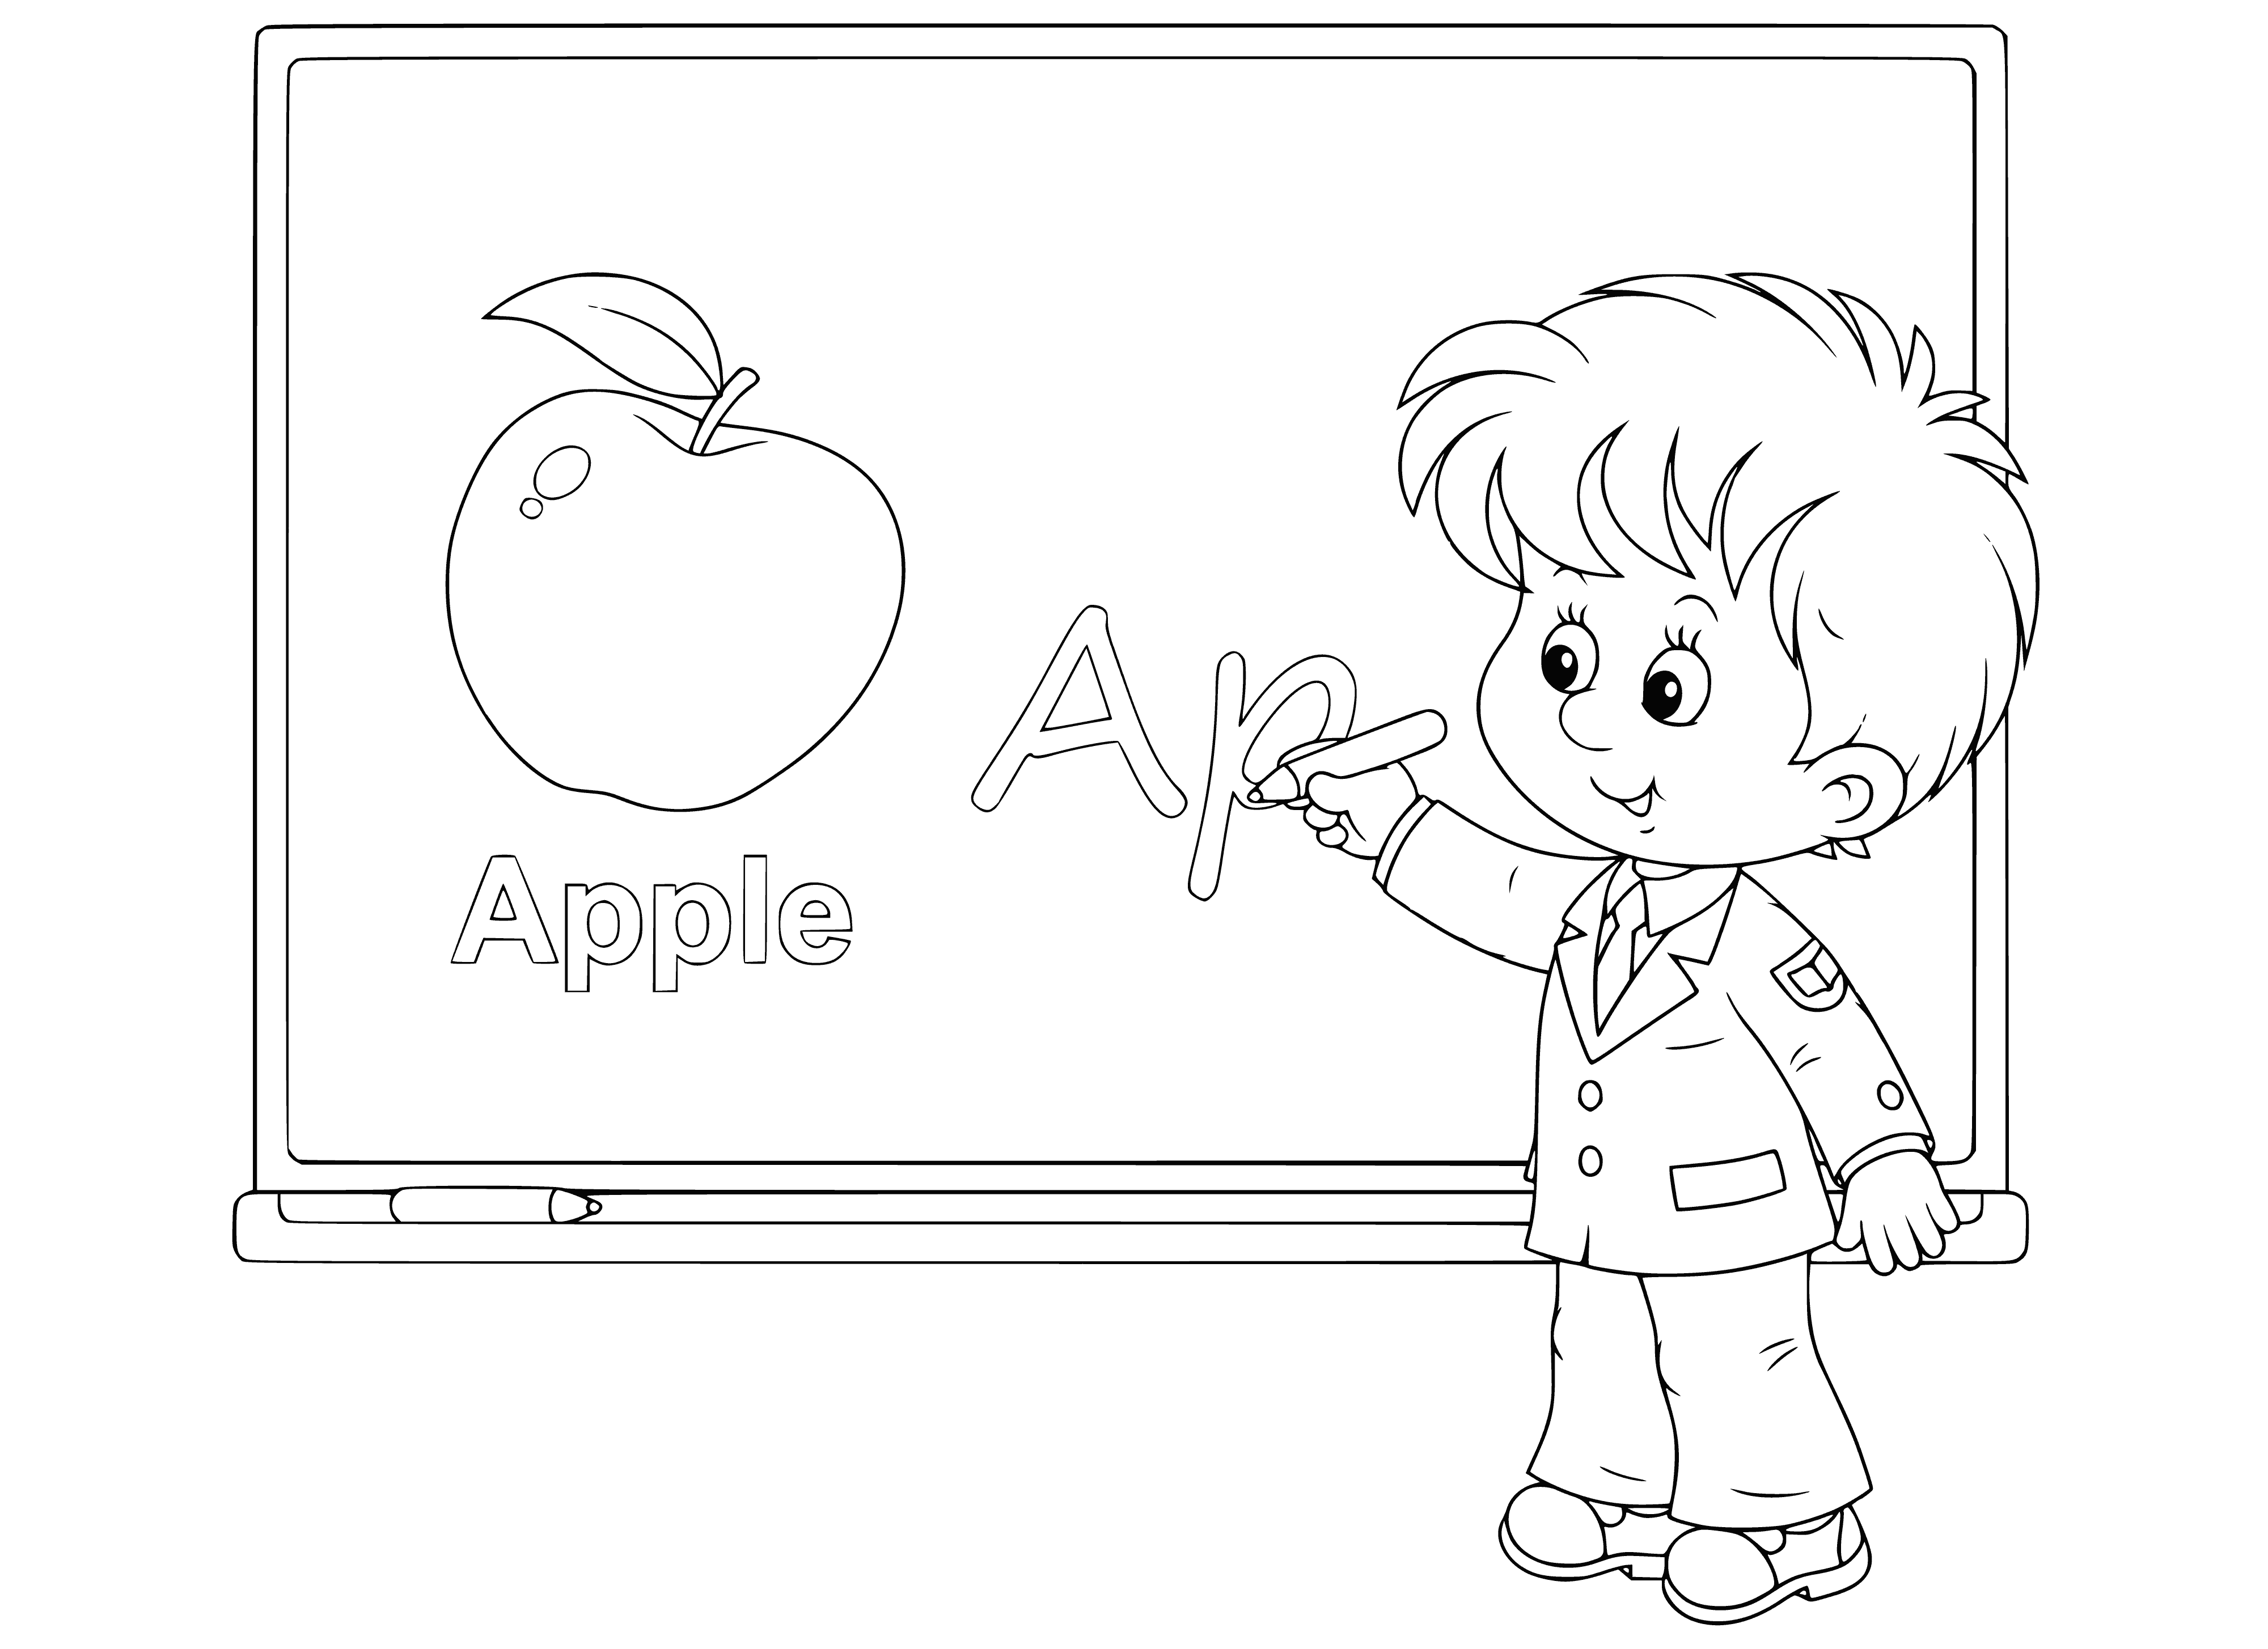 coloring page: Boy writing on blackboard: date "1 September" and "The day of knowledge." #education